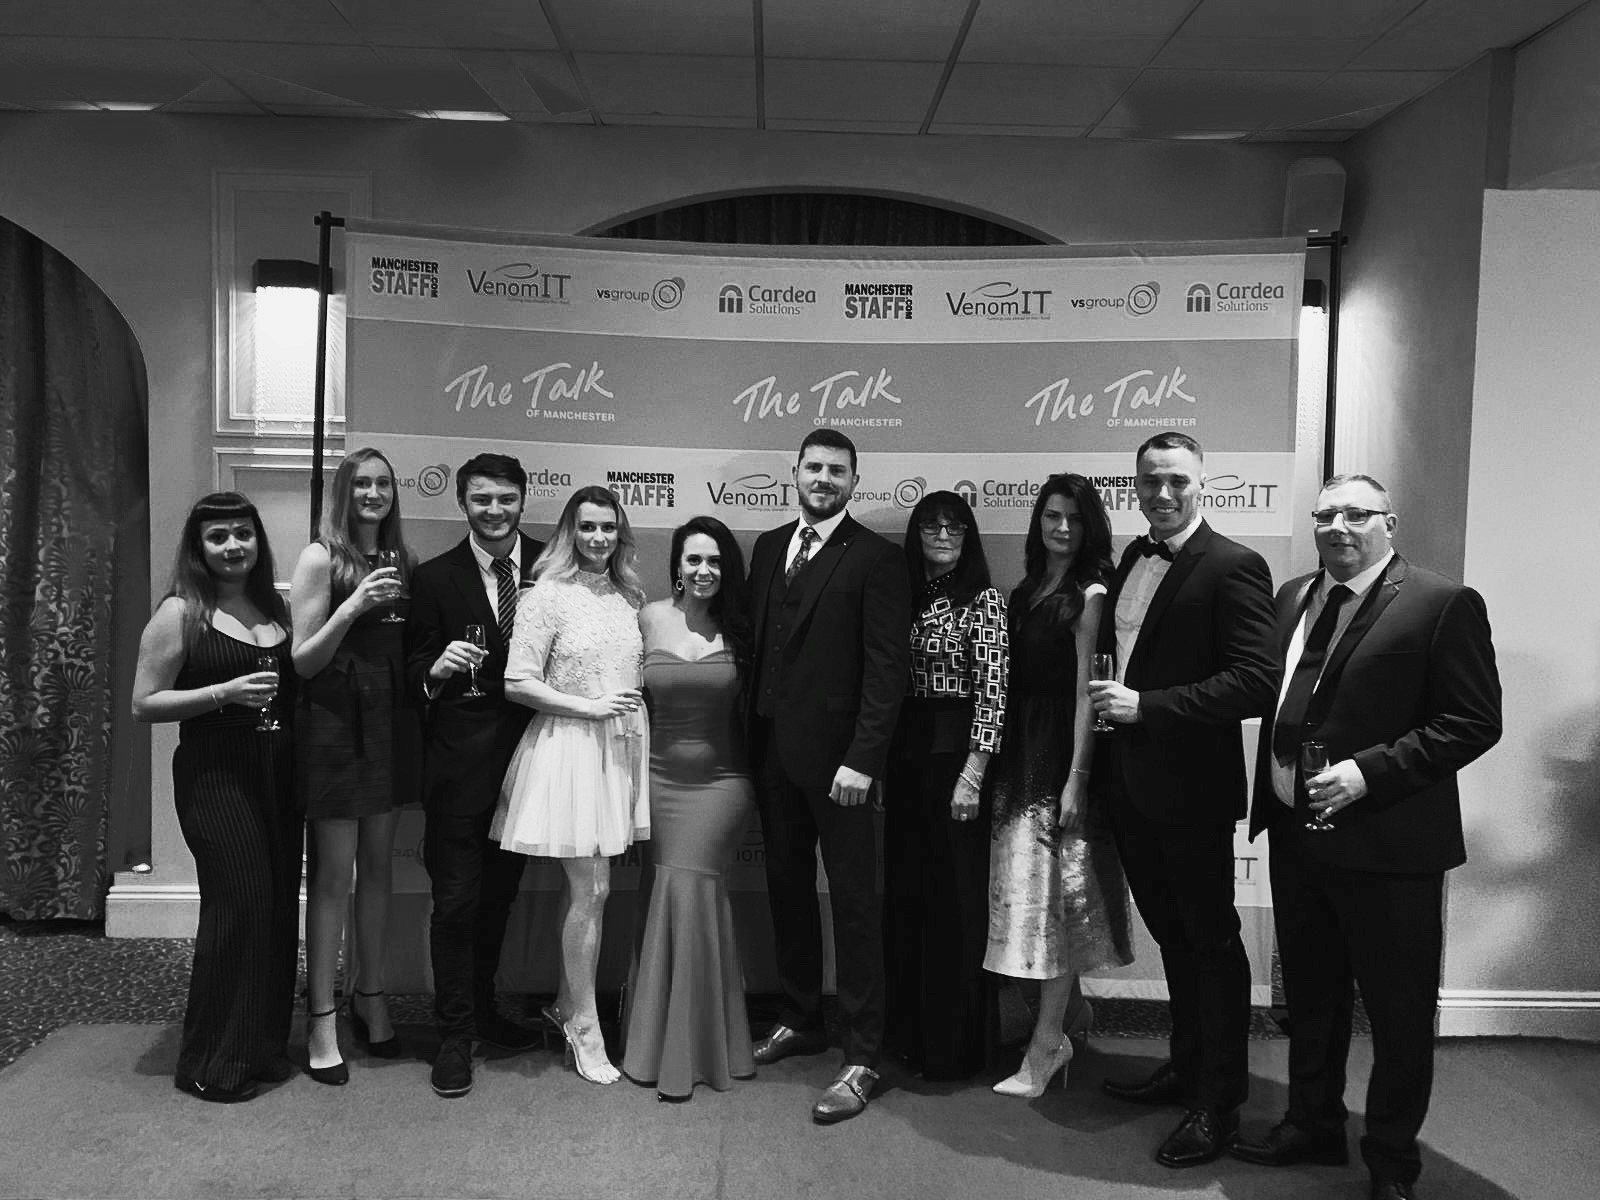 The JAW Digital team at The Talk of Manchester awards where they won best digital agency